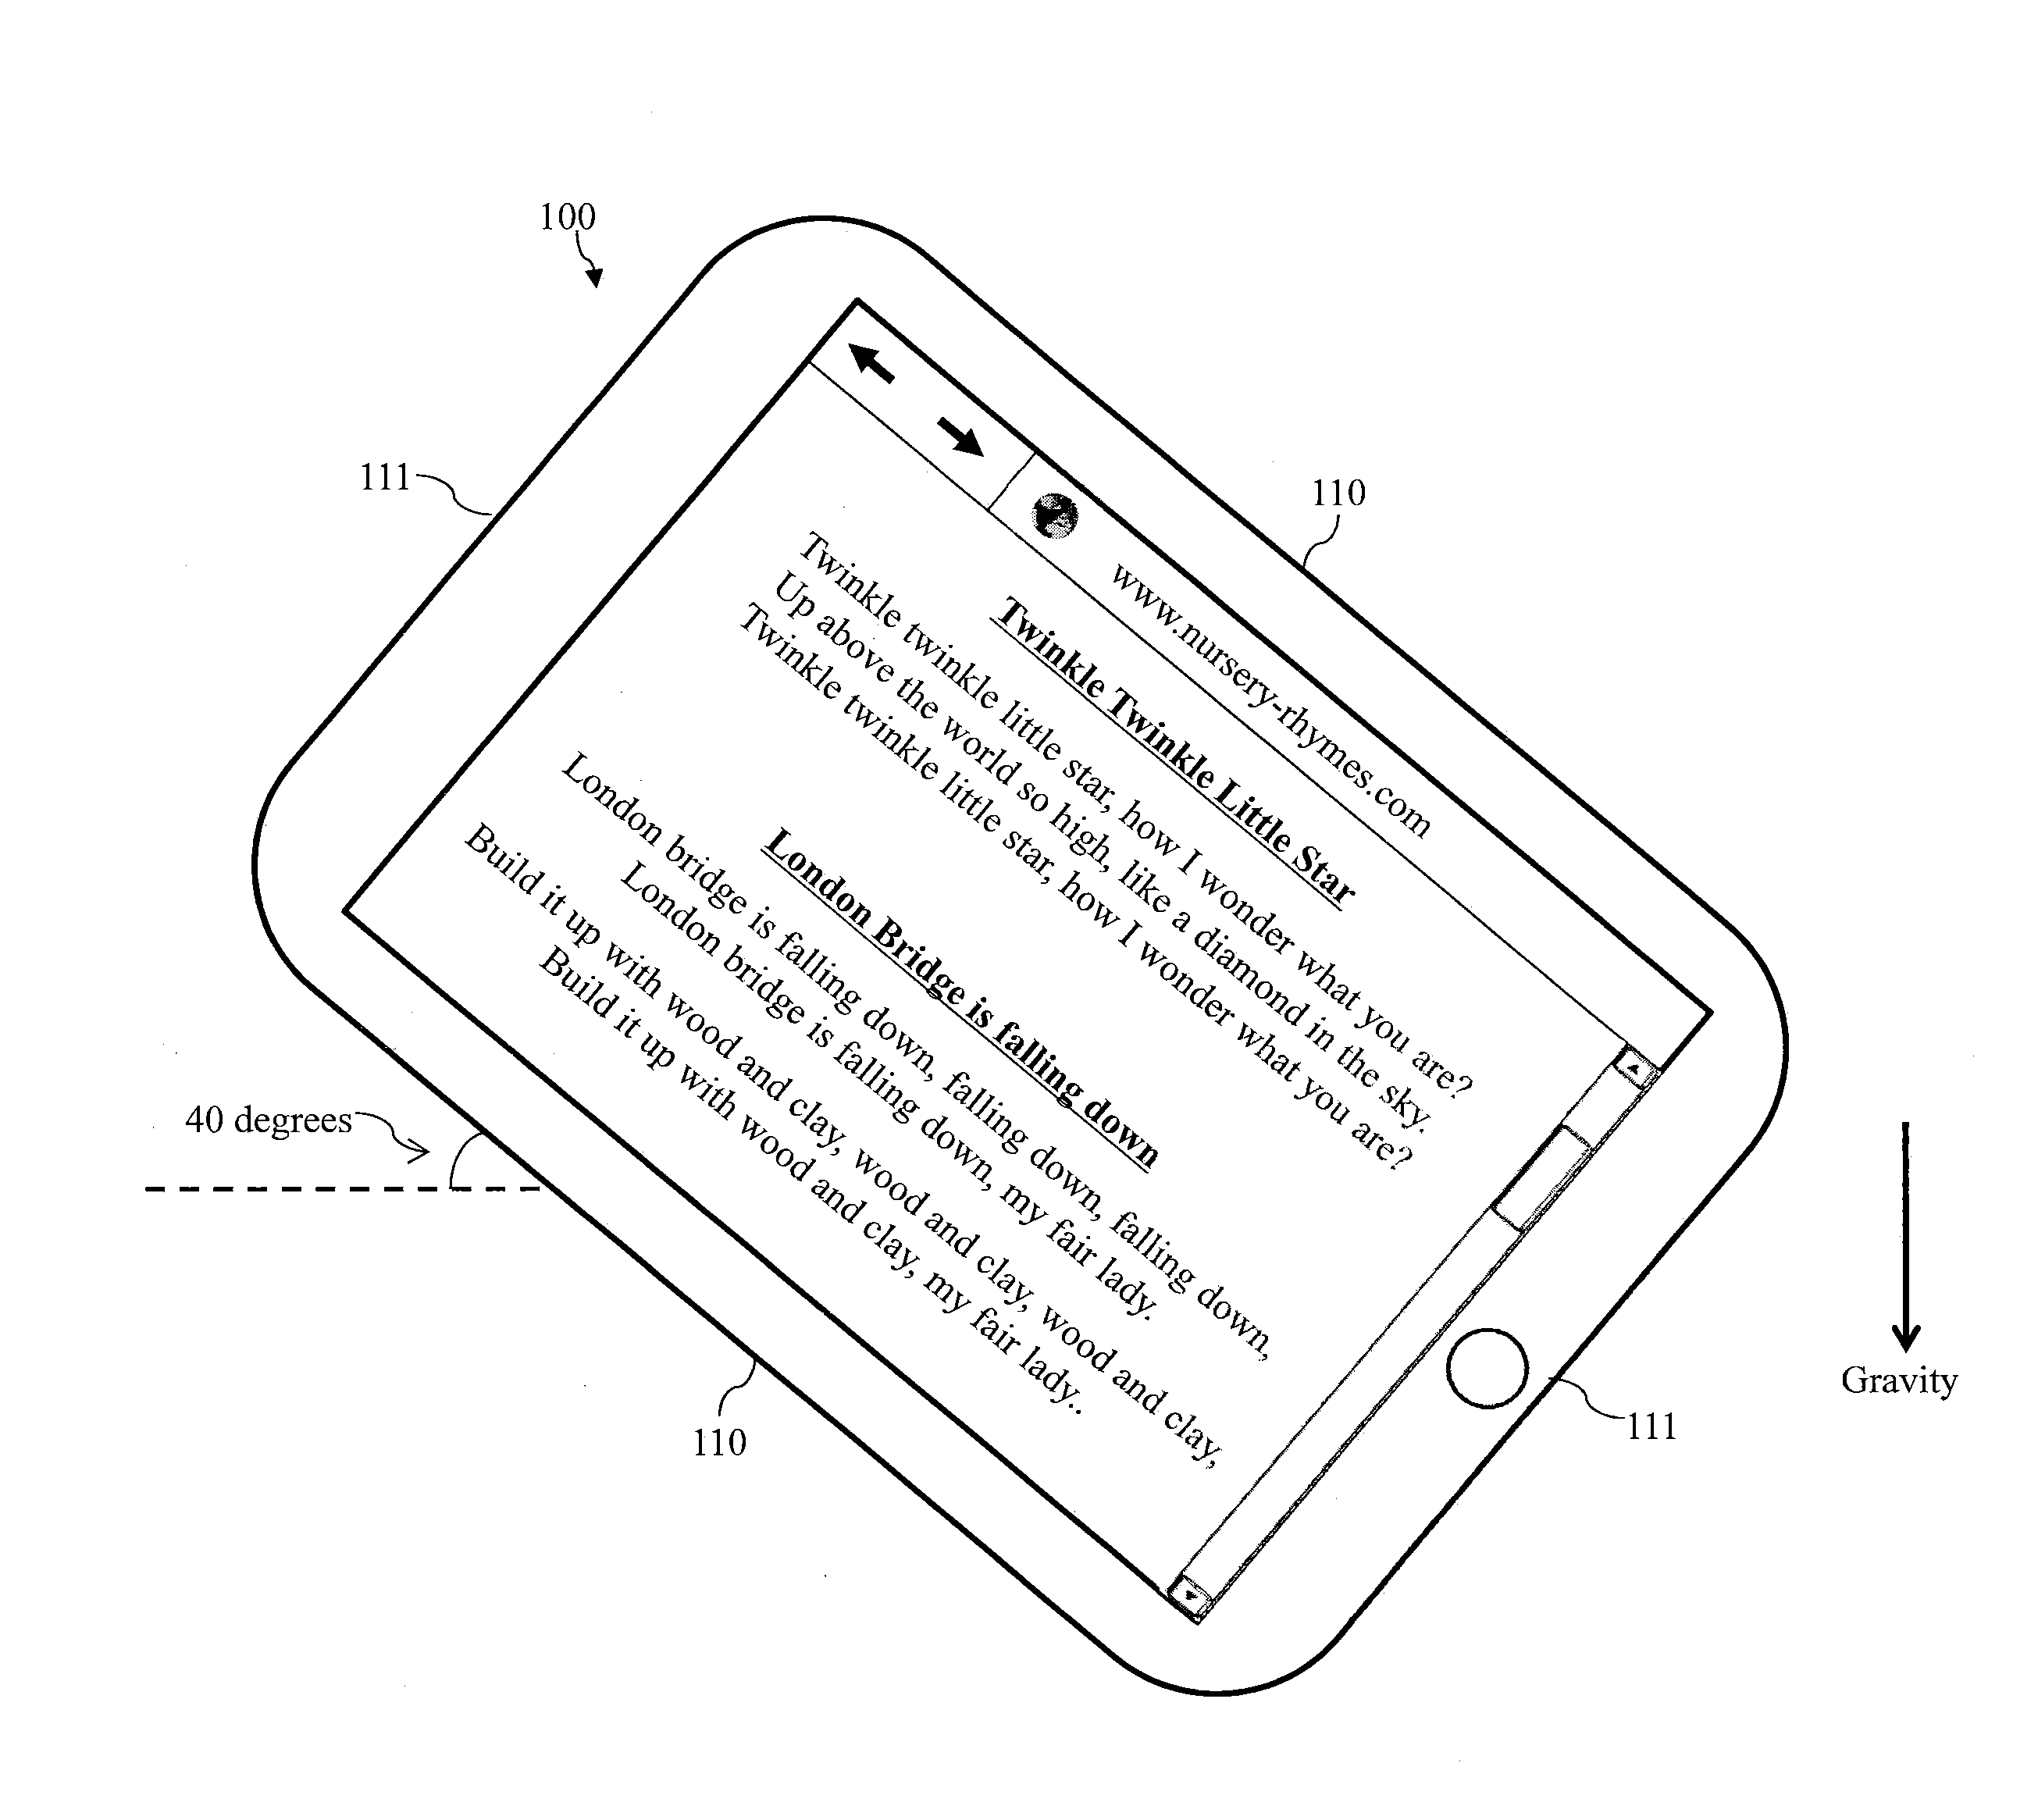 Orientation Control For a Mobile Computing Device Based On User Behavior